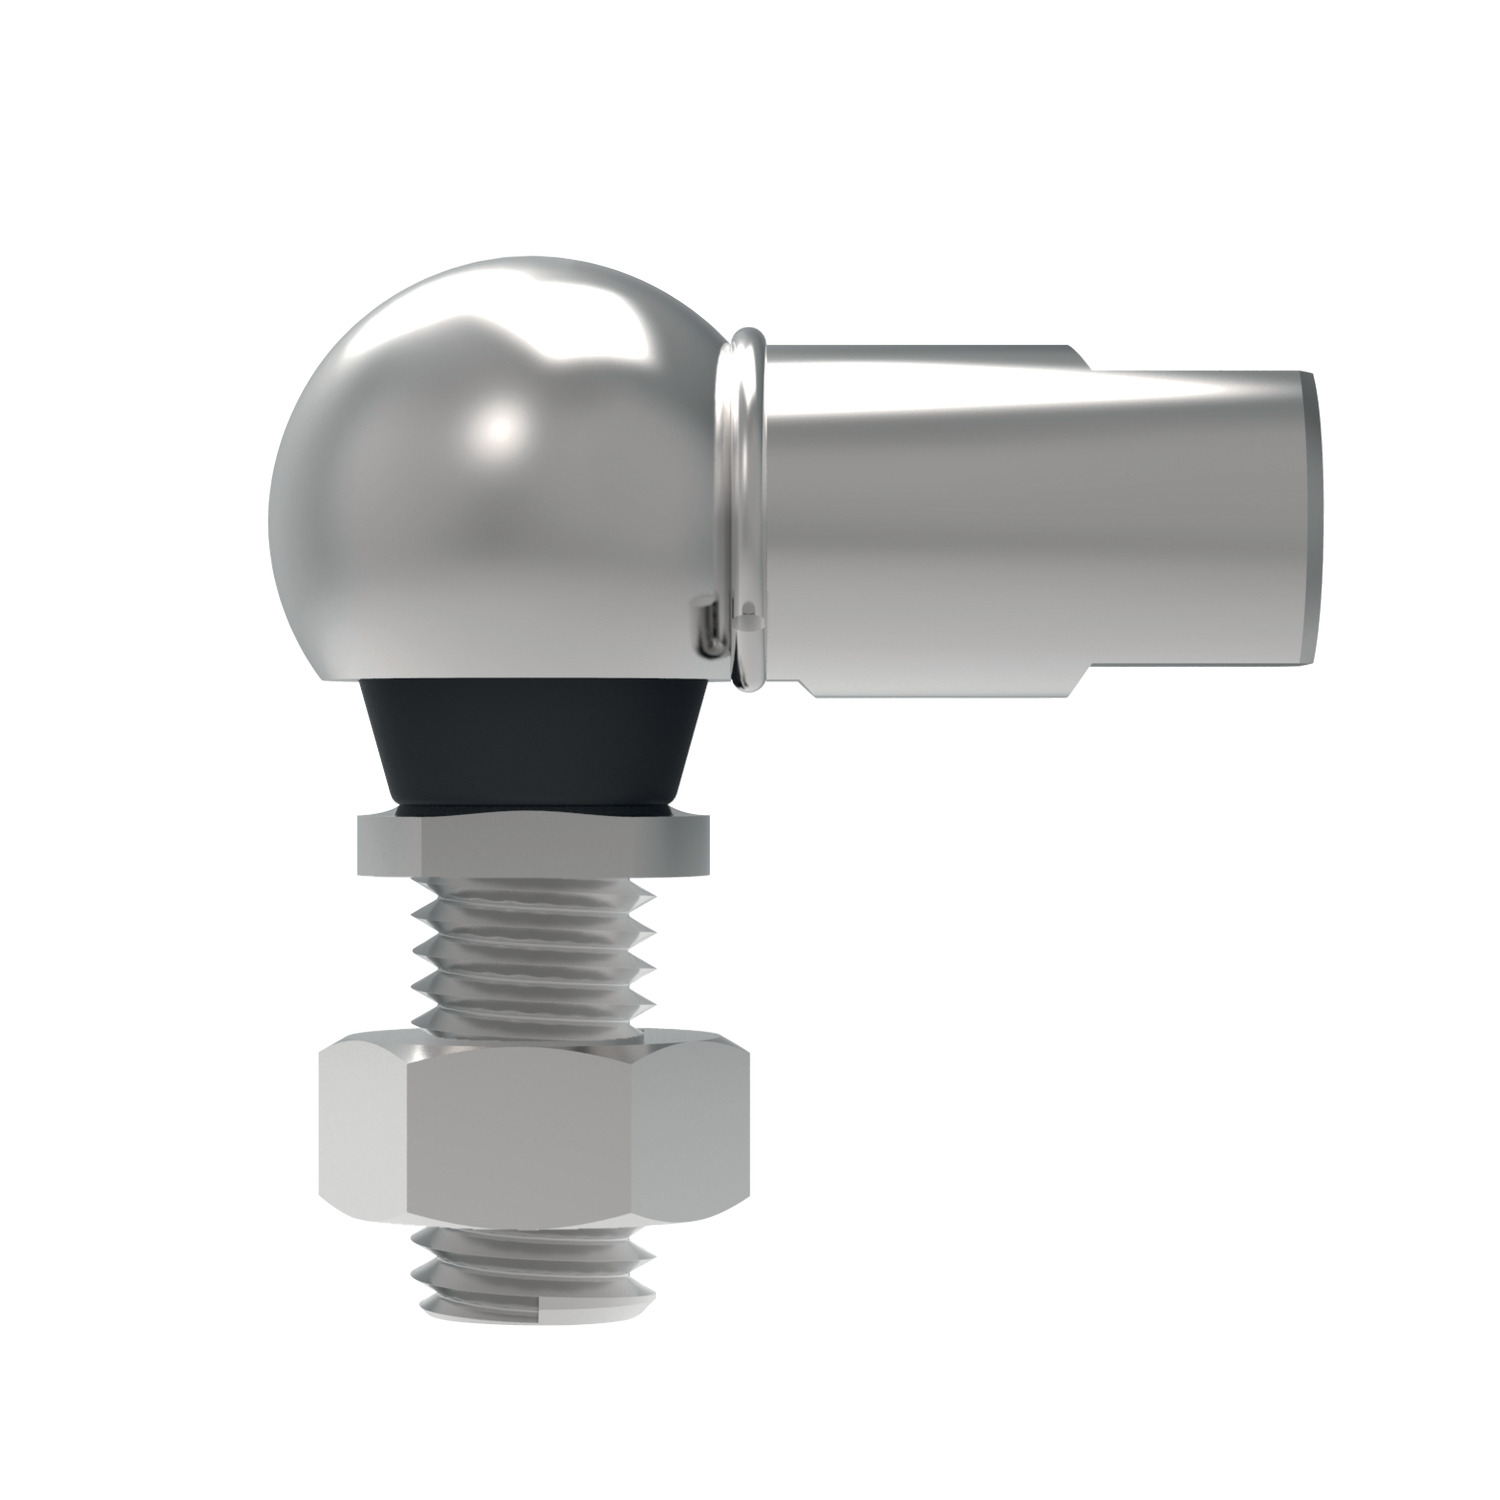 Product R3491, Ball and Socket Joint left hand thread-  with flats on housing / 